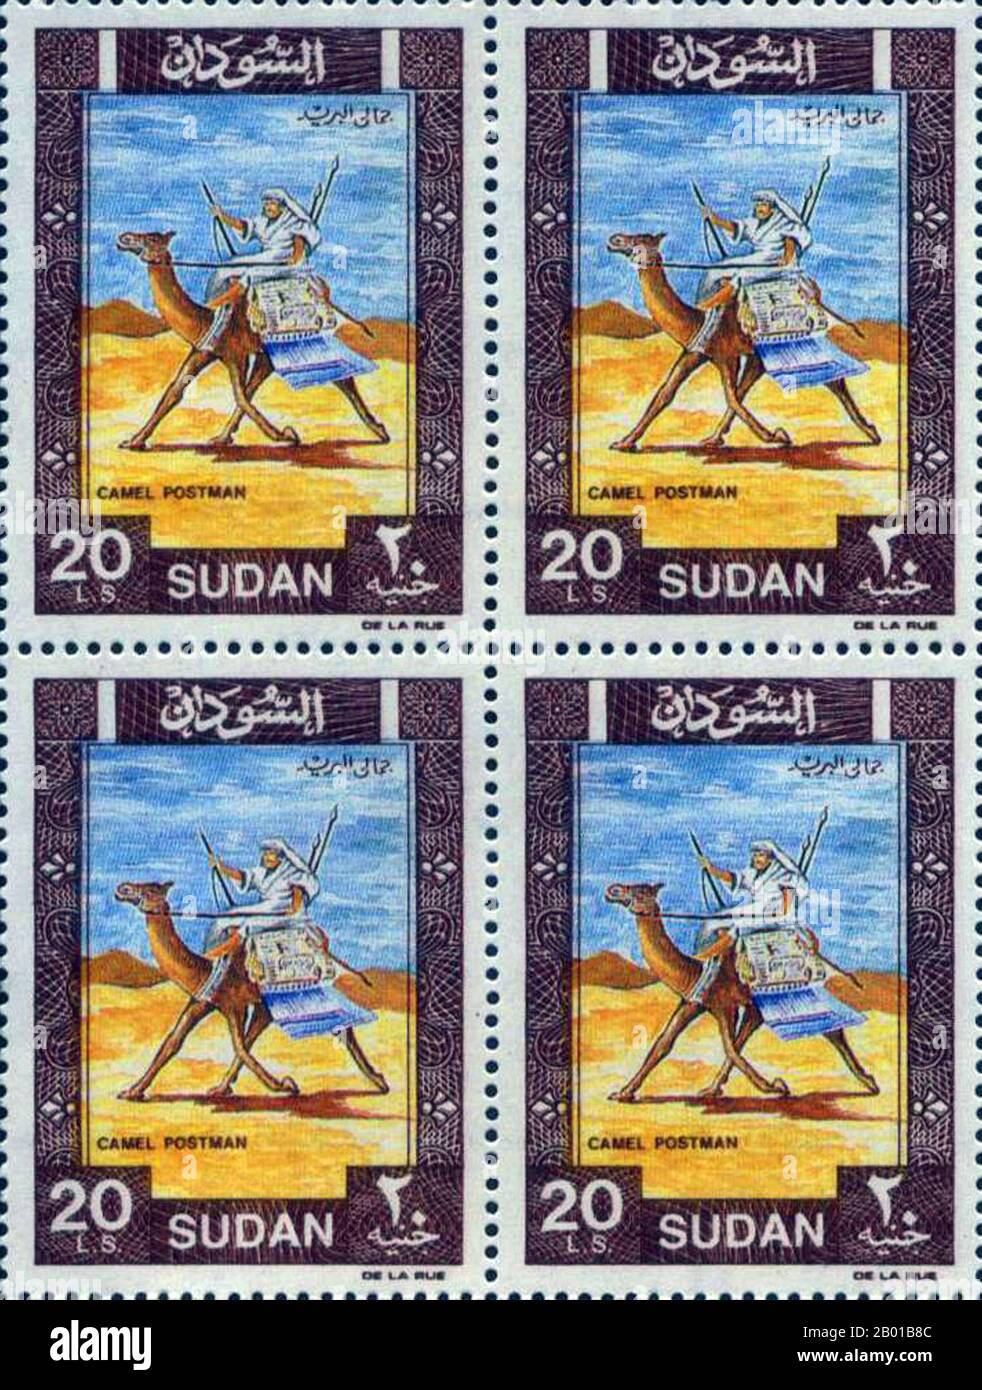 Sudan: Postage stamps showing a 'camel postman', Anglo-Egyptian Sudan.  The term Anglo-Egyptian Sudan refers to the period between 1891 and 1956 when Sudan was administered as a condominium of Egypt and the United Kingdom. Sudan (comprising modern-day Sudan and South Sudan) was de jure shared legally between Egypt and the British Empire, but was de facto controlled by the latter, with Egypt only enjoying limited local power in reality as Egypt itself fell under increasing British influence.  The Egyptian Revolution of 1952 saw Egypt demanding the end to the condominium and Sudan's independence Stock Photo